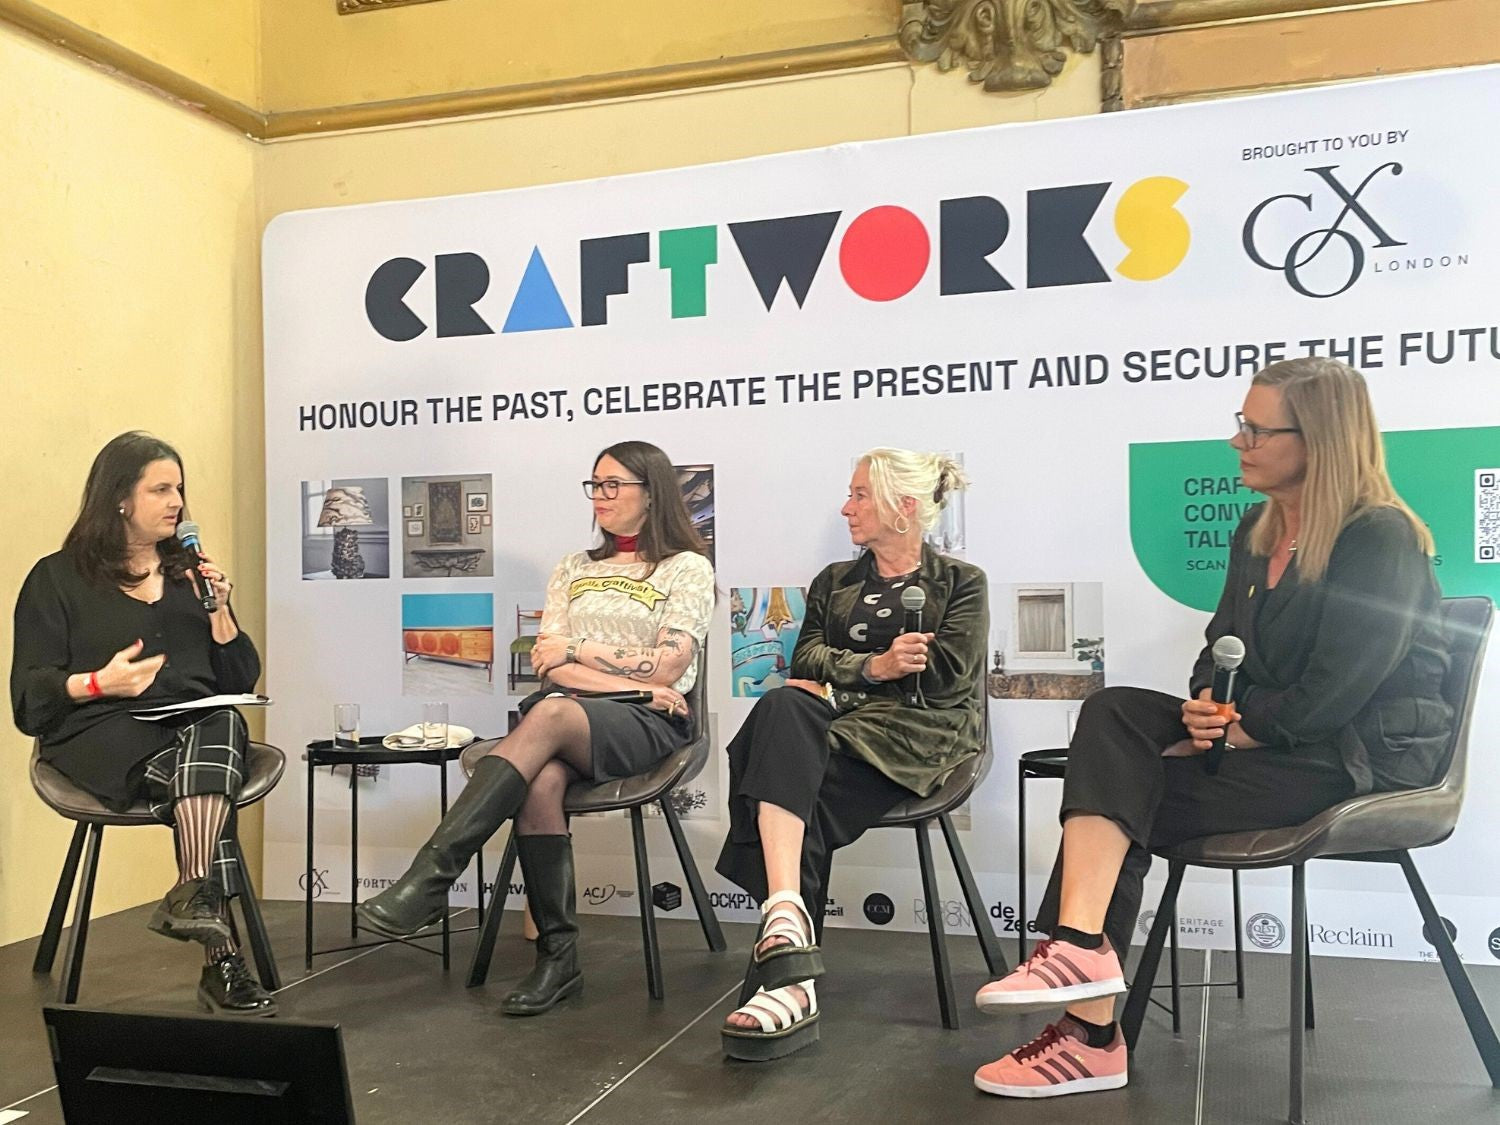 How to be a craft activist: a panel discussion at Craftworks